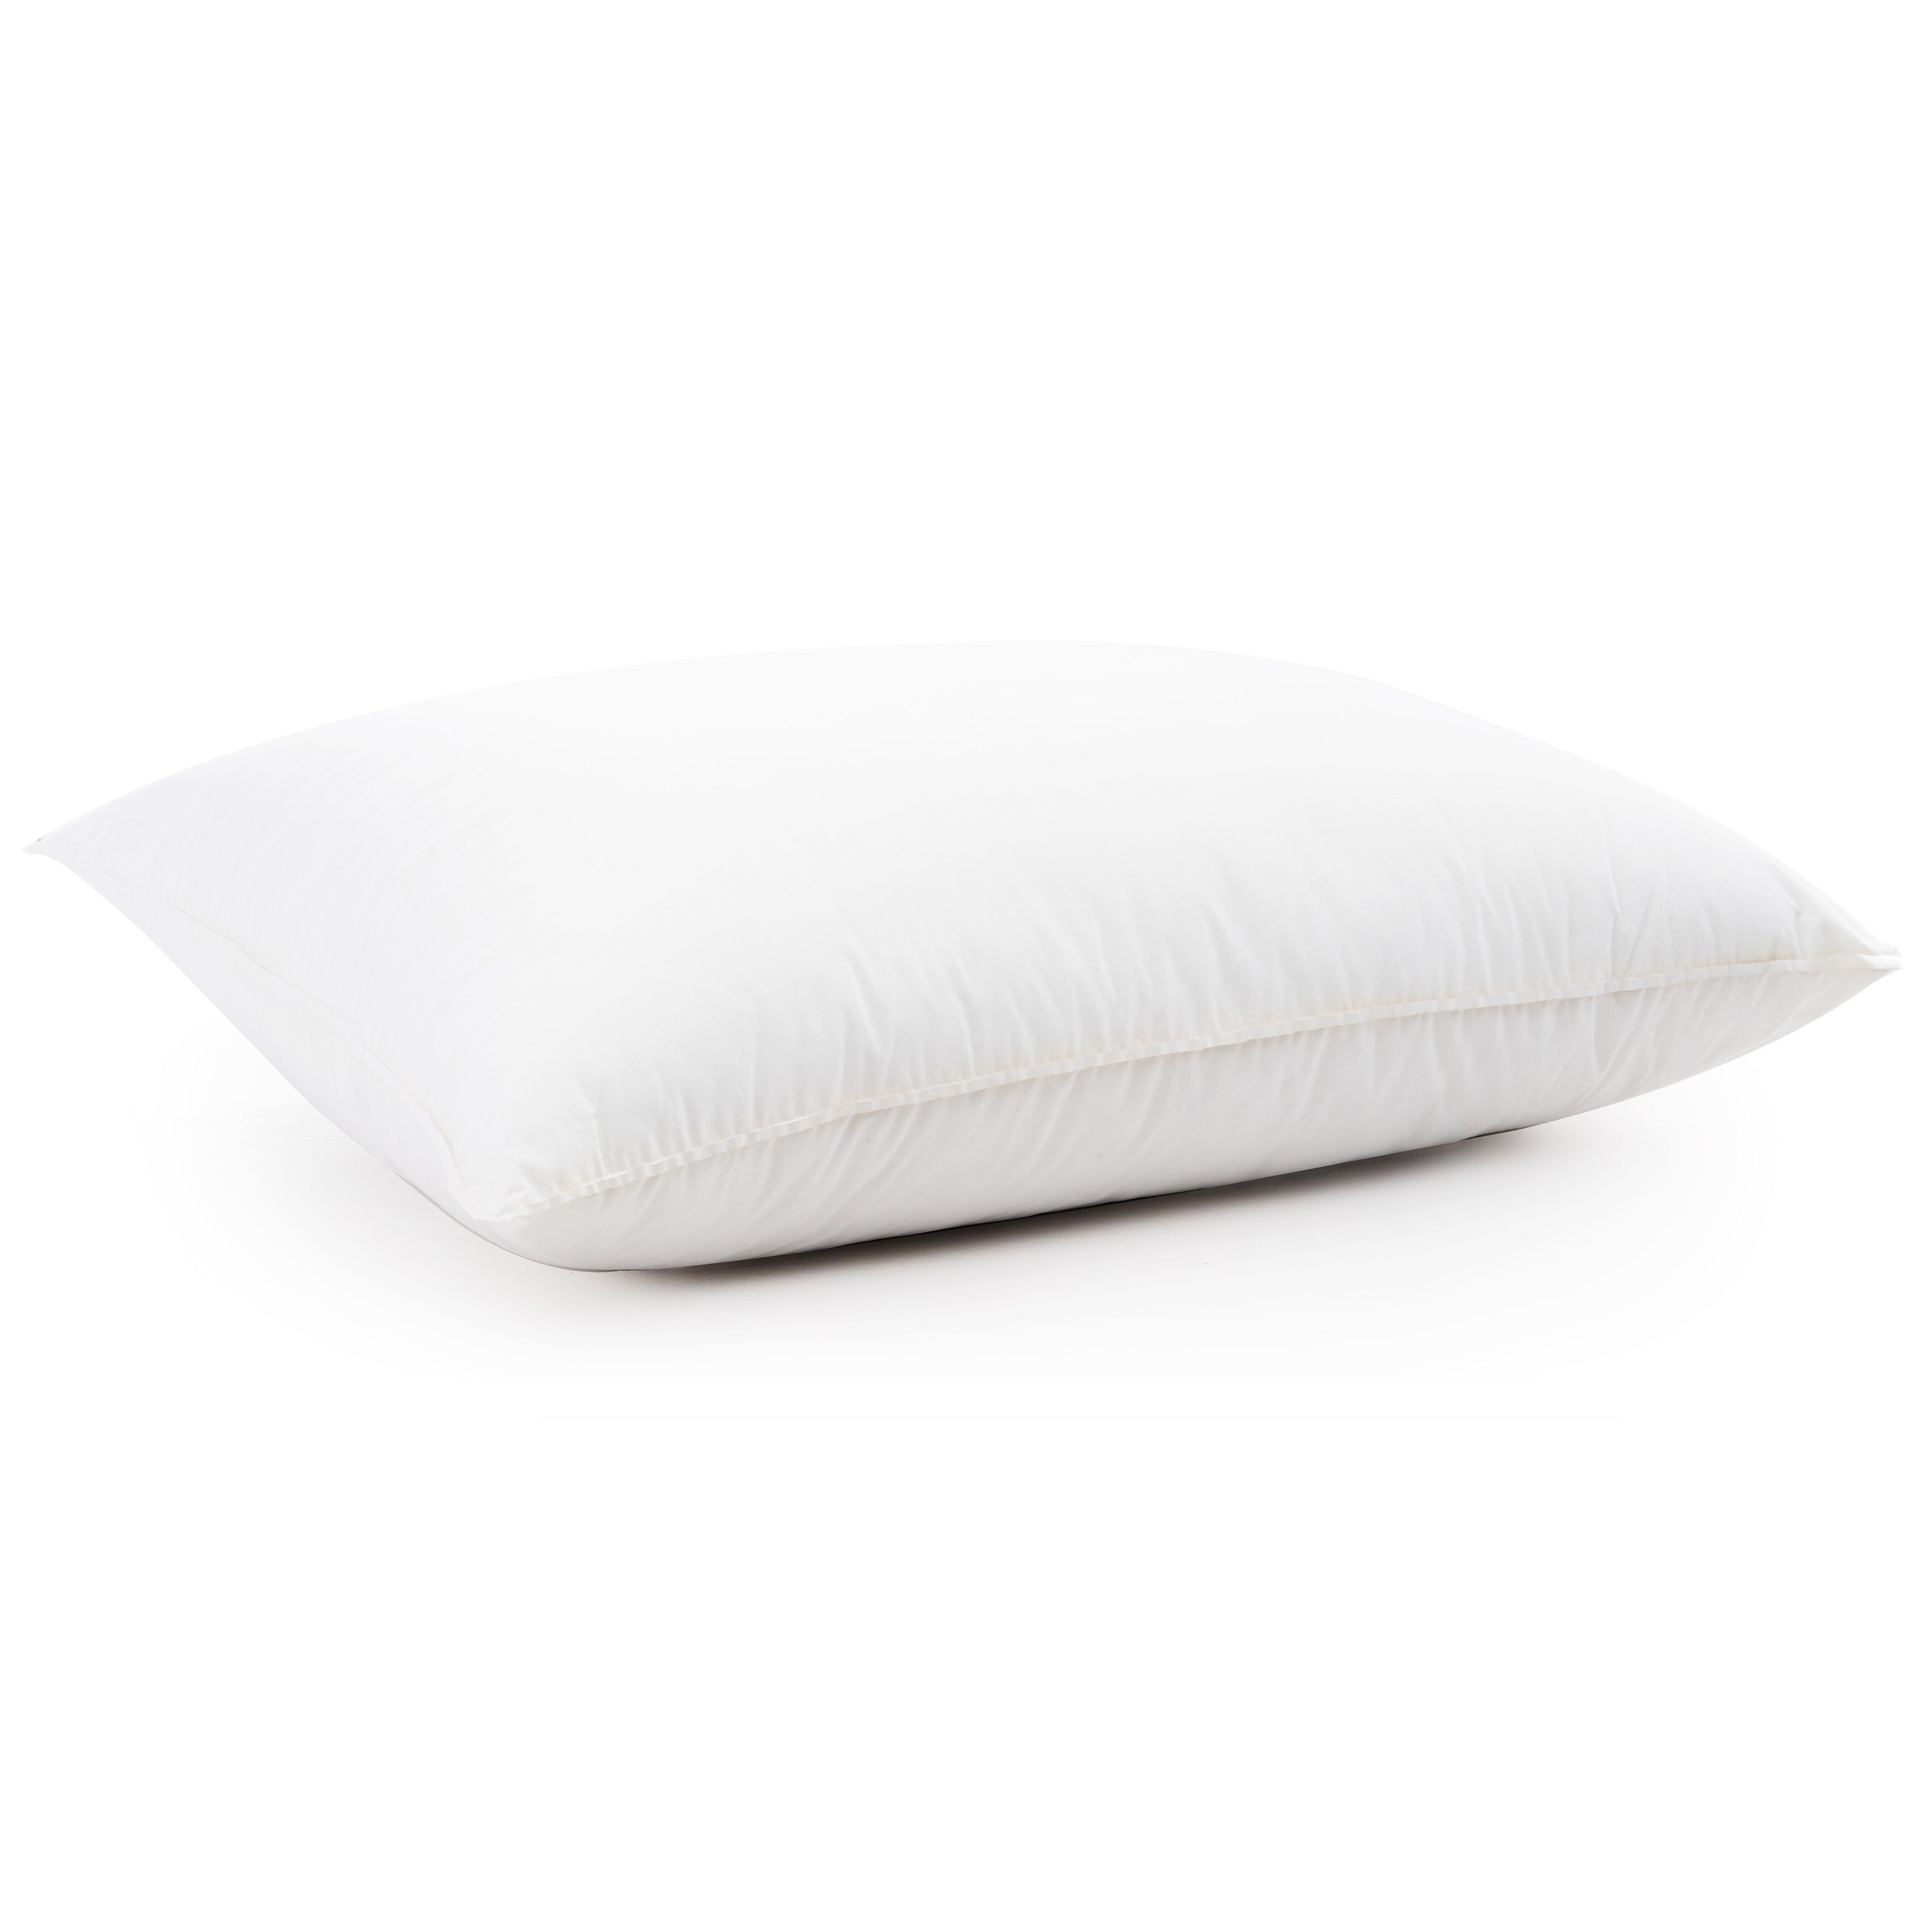 Cheer Collection Hypoallergenic Hollow Fiber Pillows - White, King (Set of 4)